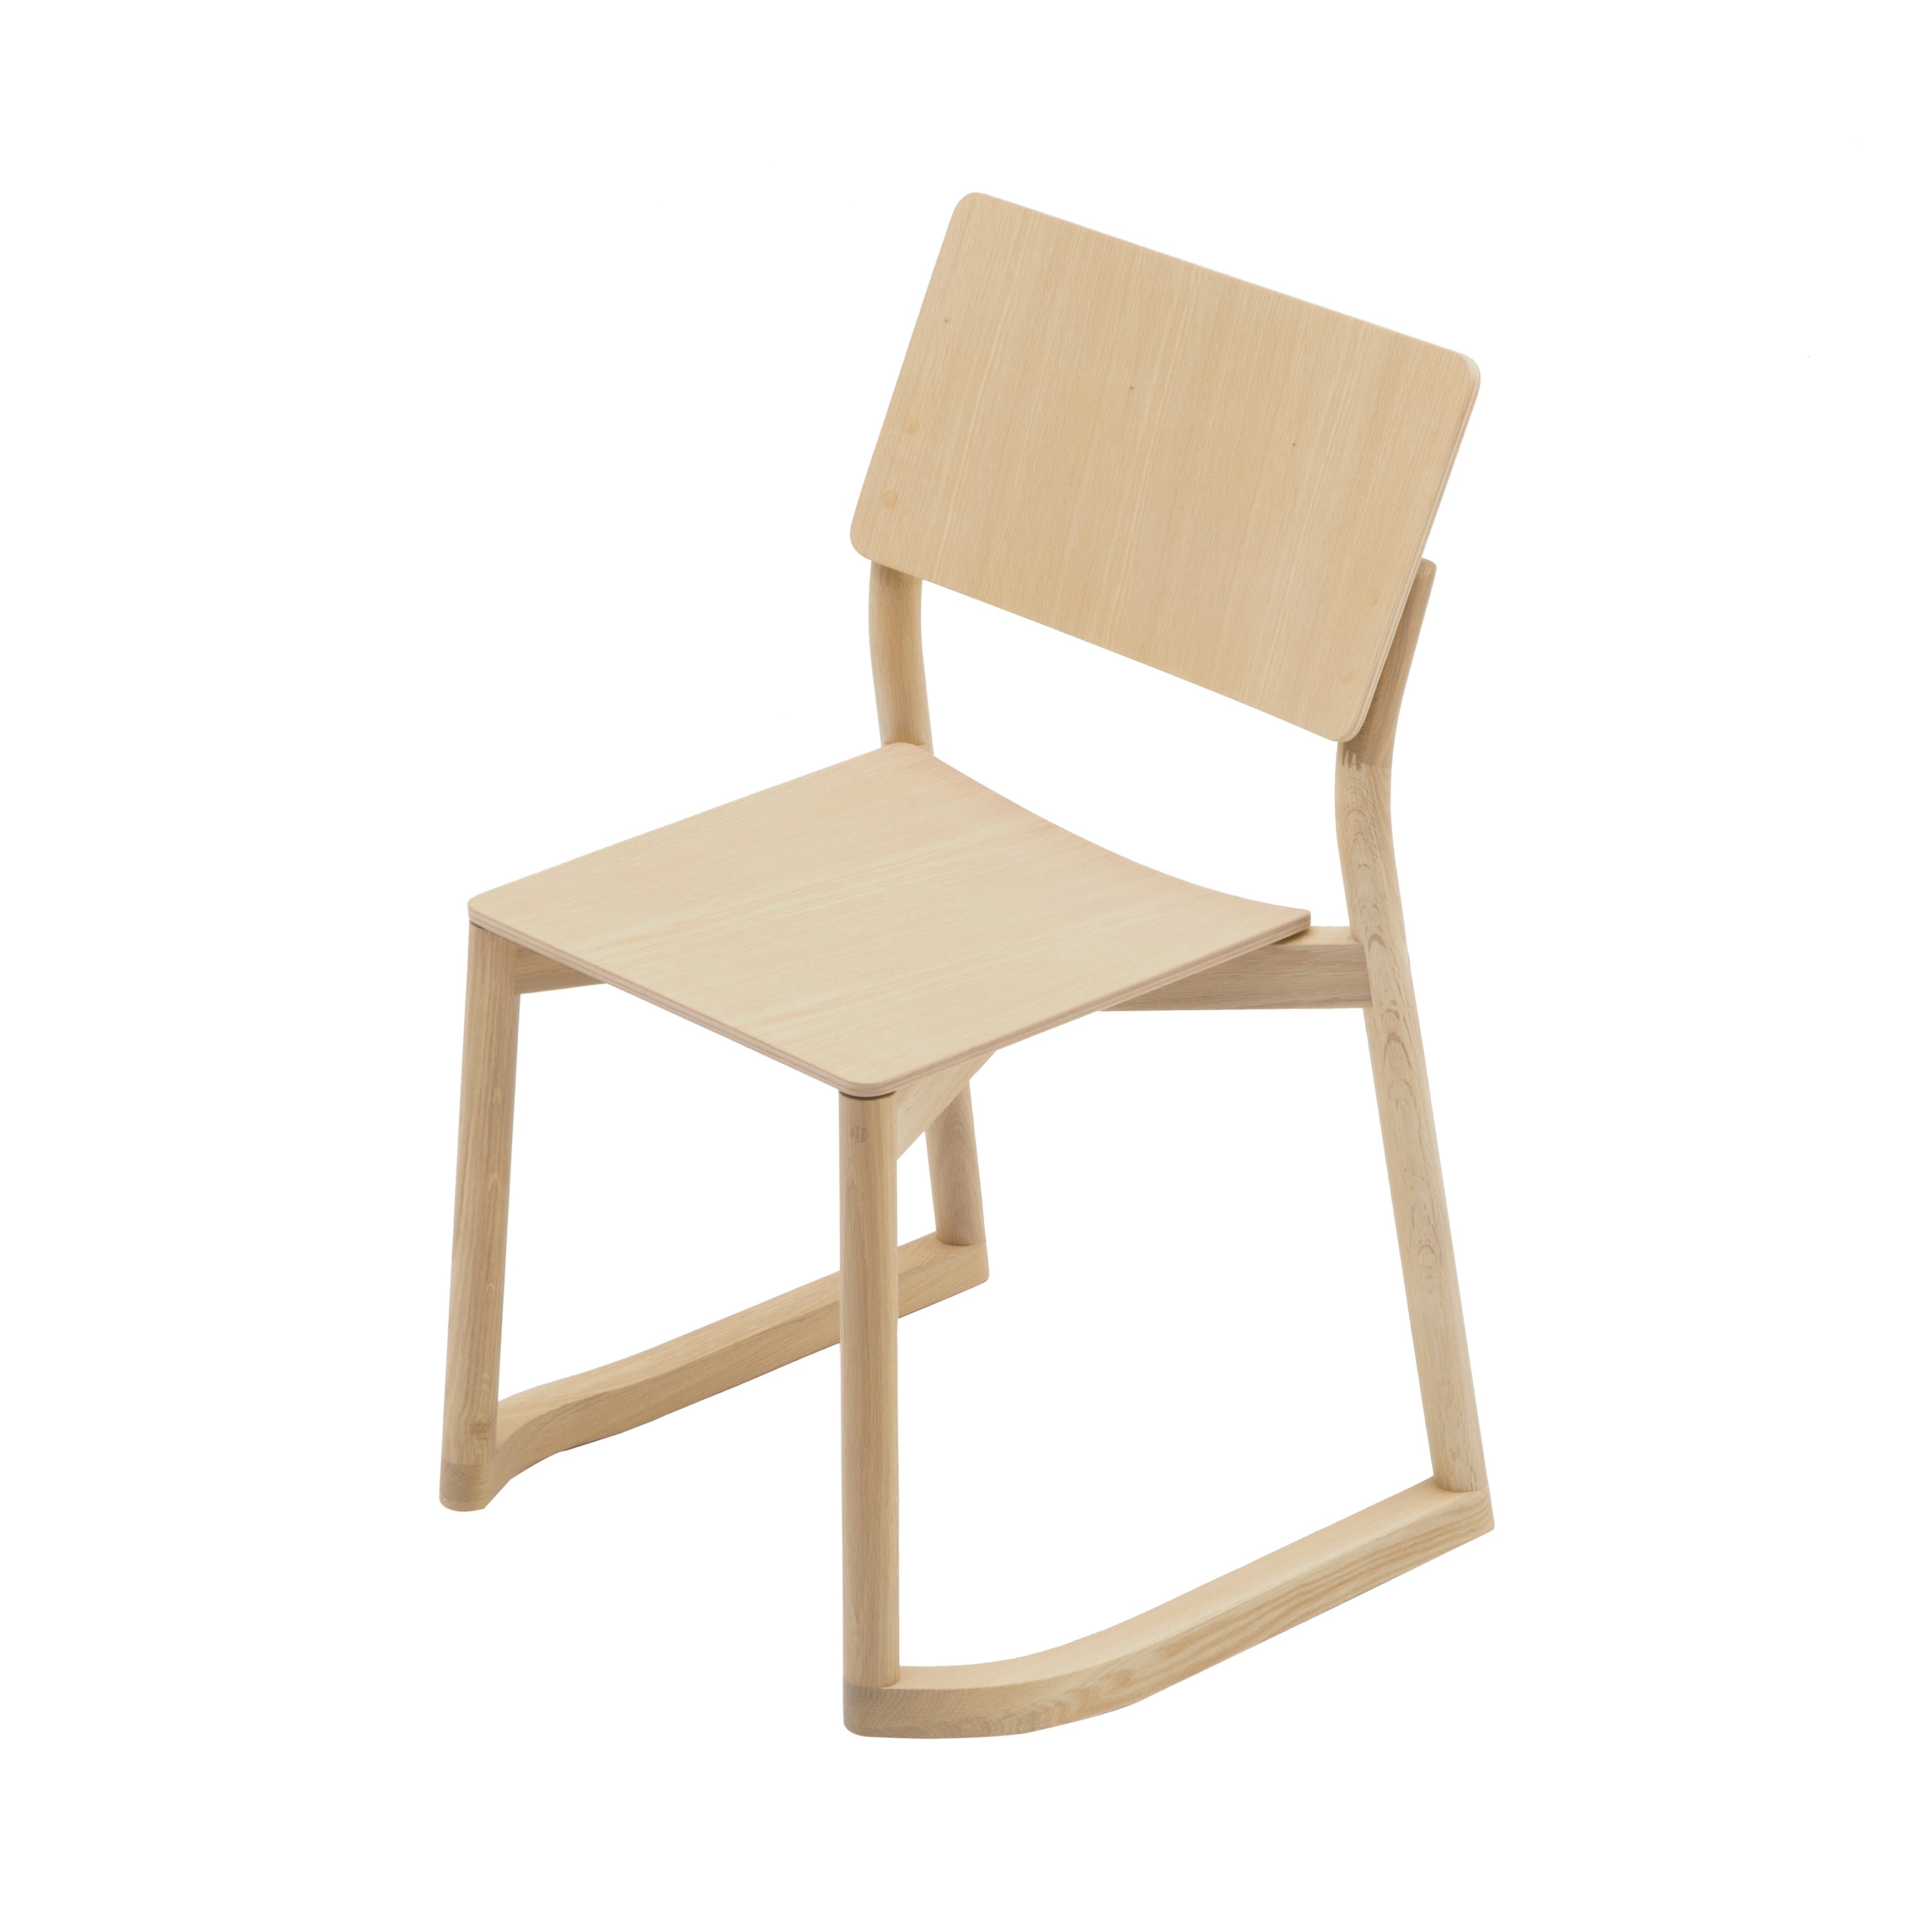 Panorama Chair With Runners: Pure Oak